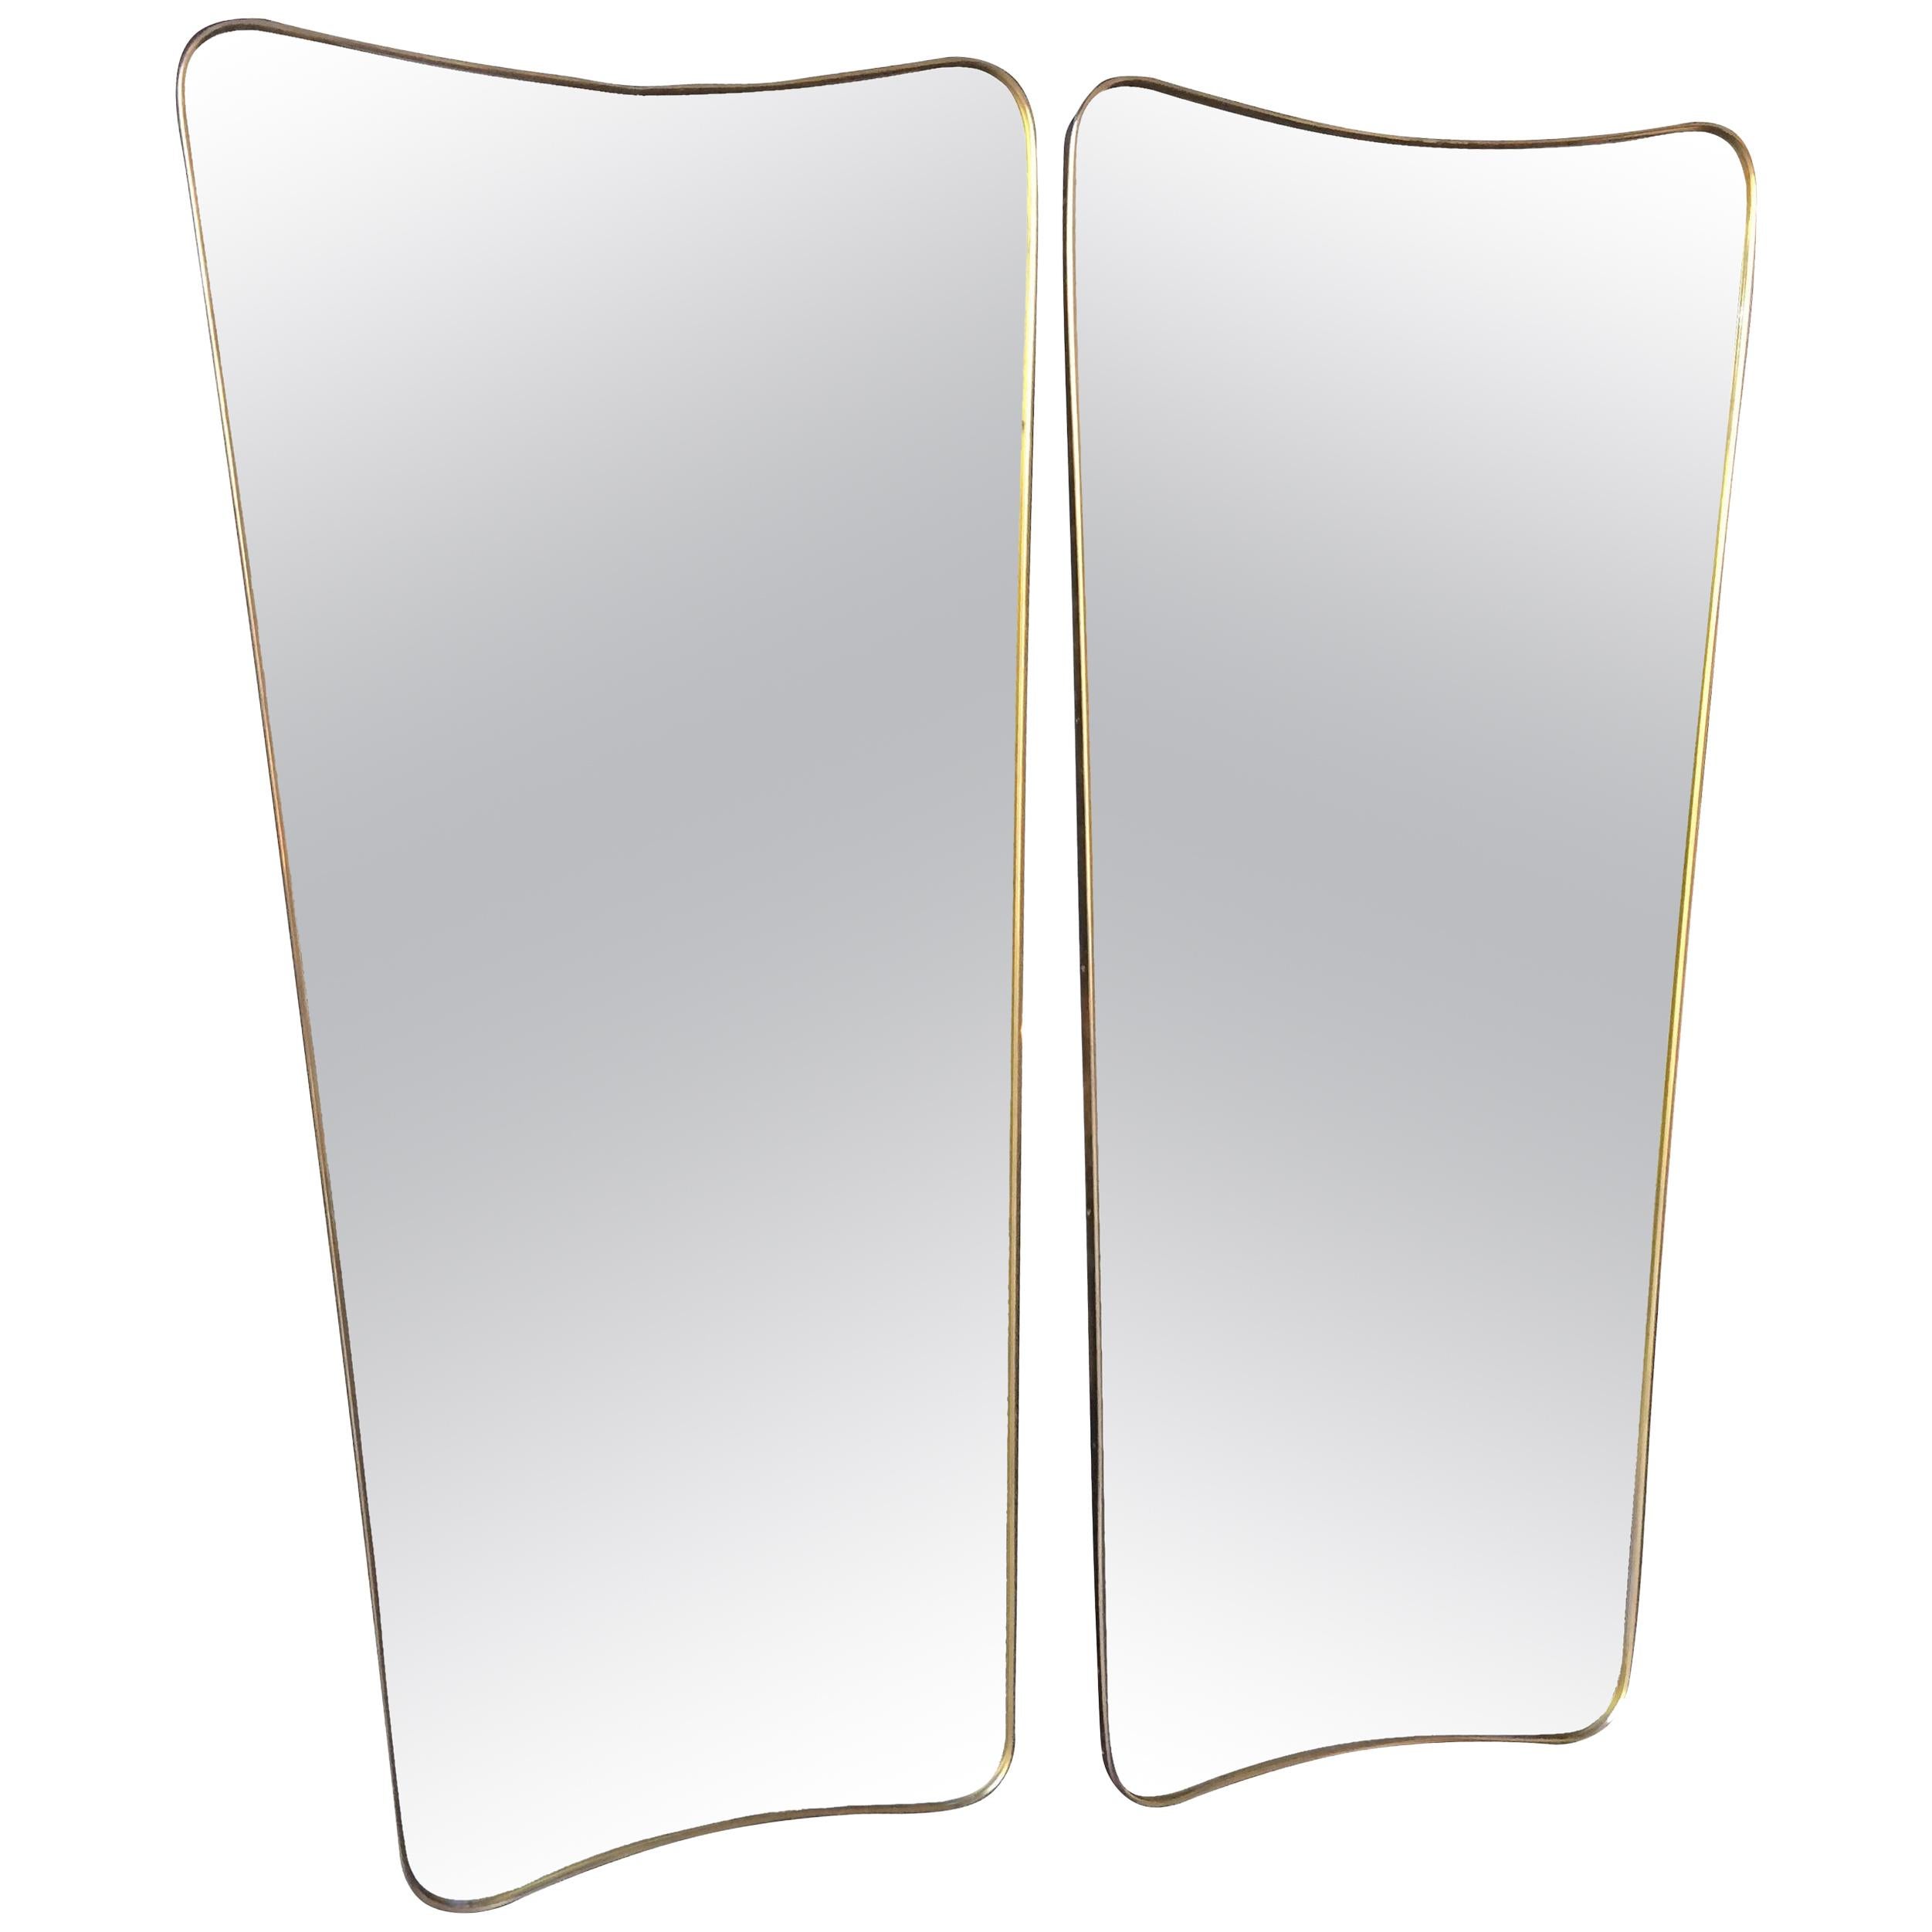 AN ITALIAN SHIELD MIRROR WITH BRASS SURROUND IN THE STYLE OF GIO PONTI WITH CURVED AND TAPERED FRAME.

THESE ARE MADE TO ORDER IN ITALY AND TAKE 4-6 WEEKS TO MAKE AND DELIVER TO LONDON.

TWO OTHER SIZES ARE 91CM HIGH and 145 CM HIGH.

   